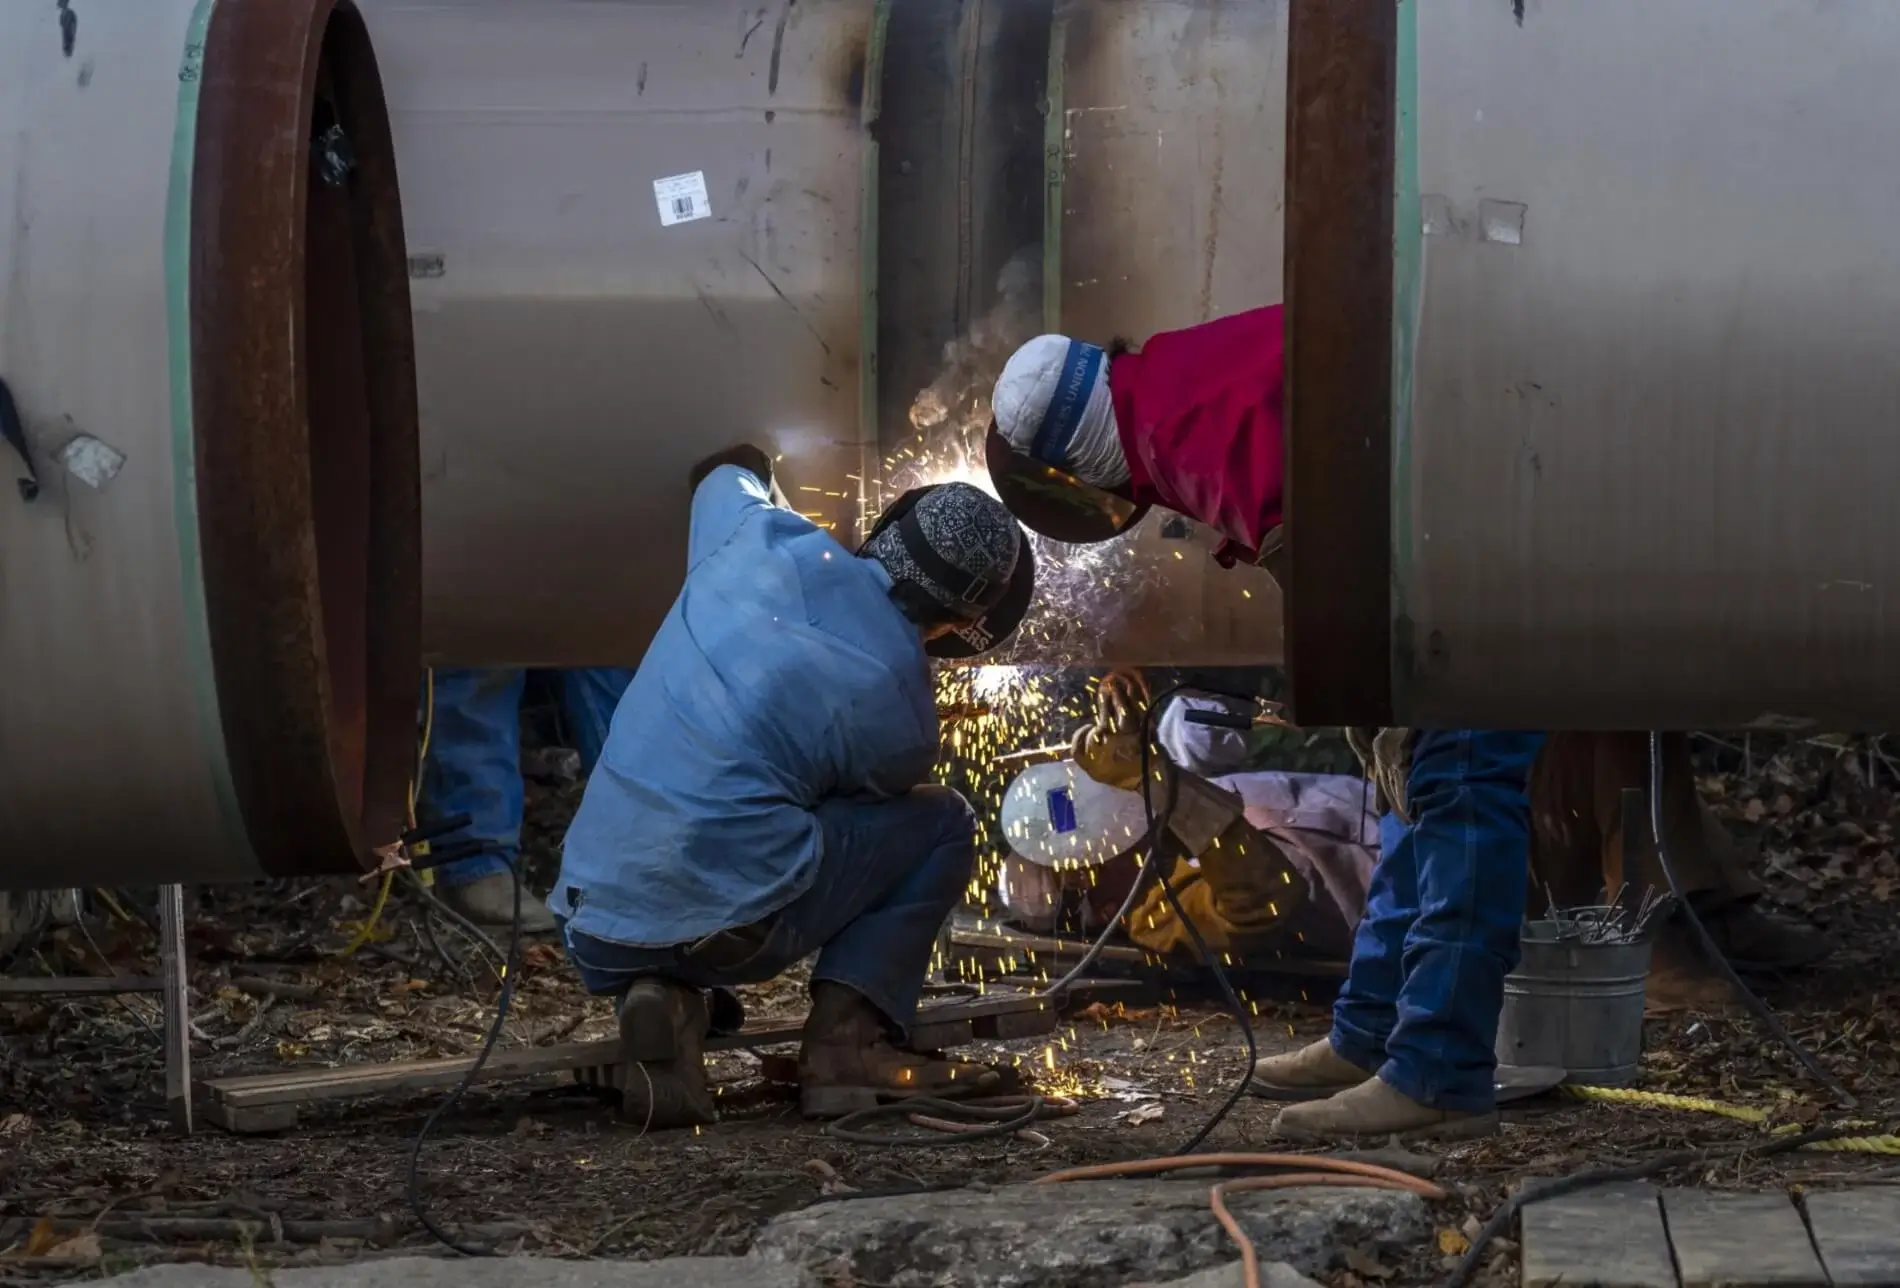 Employees welding two pipes with sparks flying